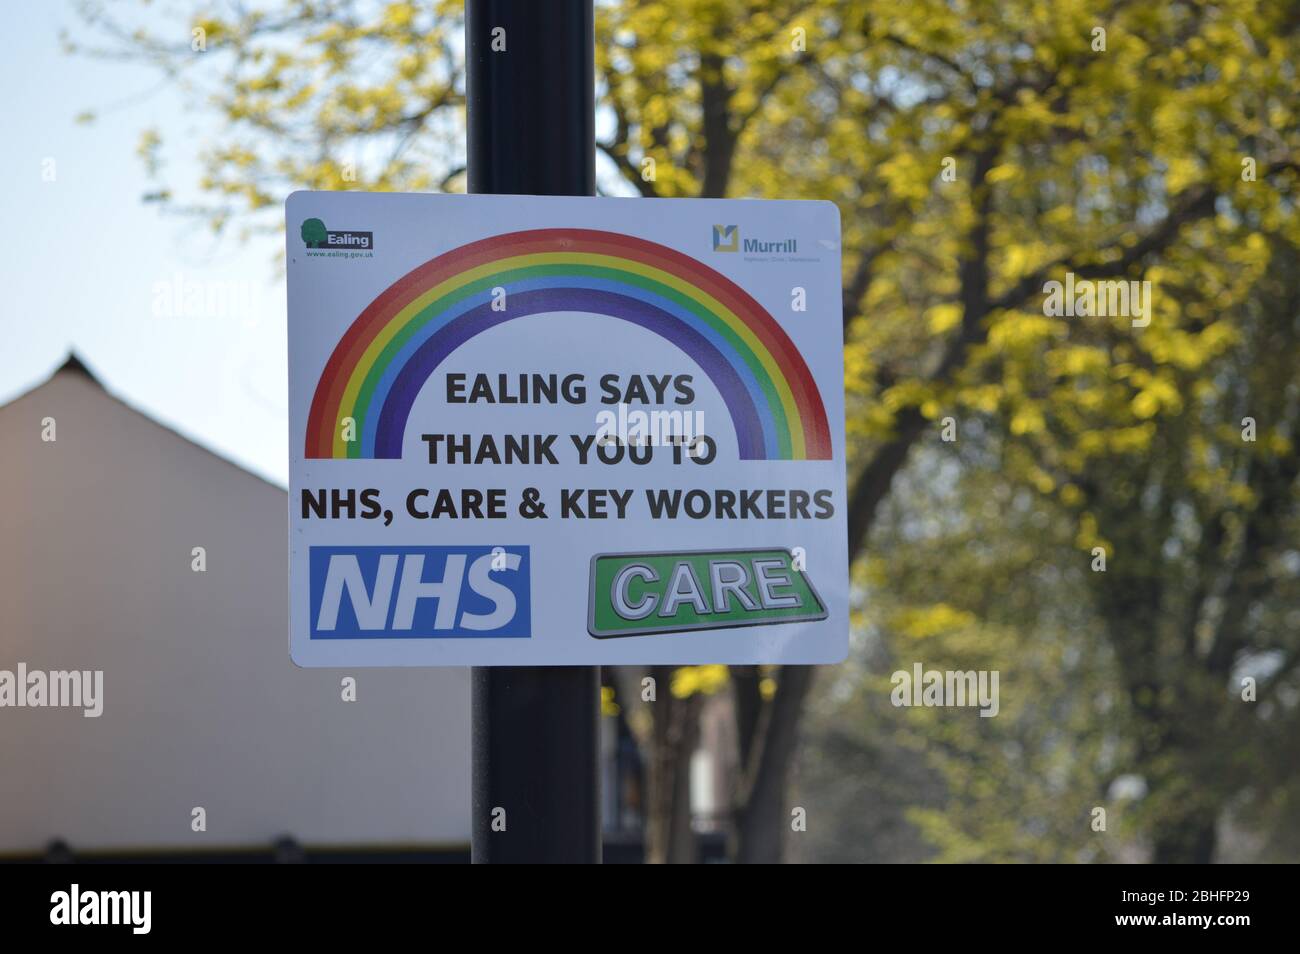 London, UK. 25 April, 2020. A message from Ealing council thanking the NHS, Care & Key Workers during the coronavirus pandemic. Stock Photo